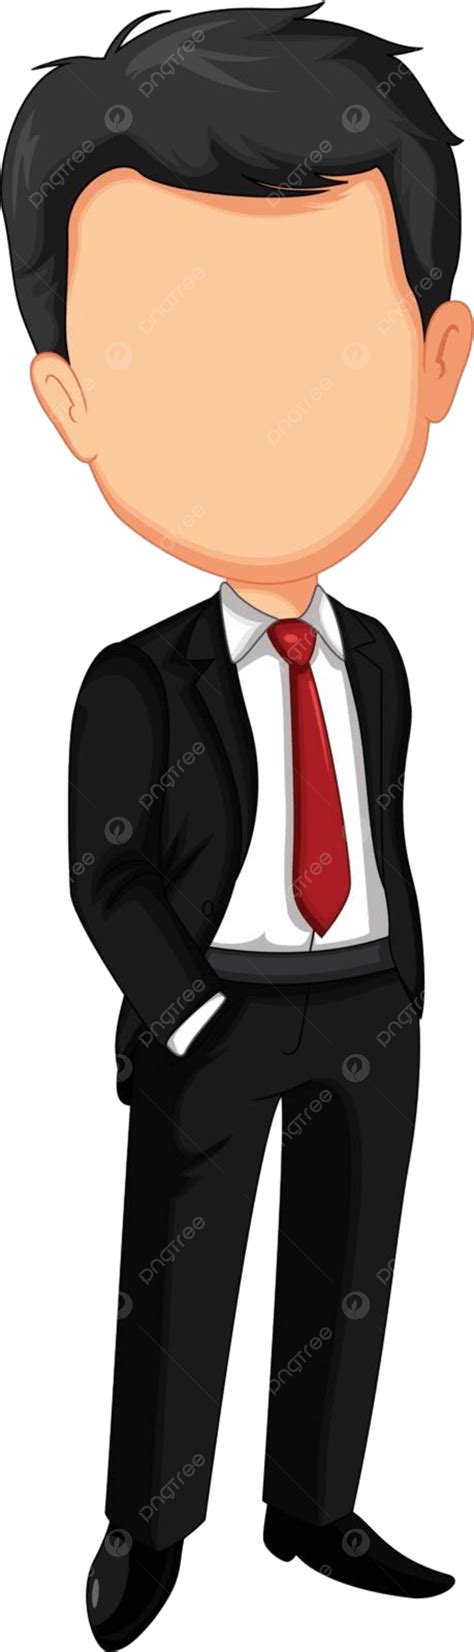 Business Man Cartoon Without Face Employment Face Adult Vector